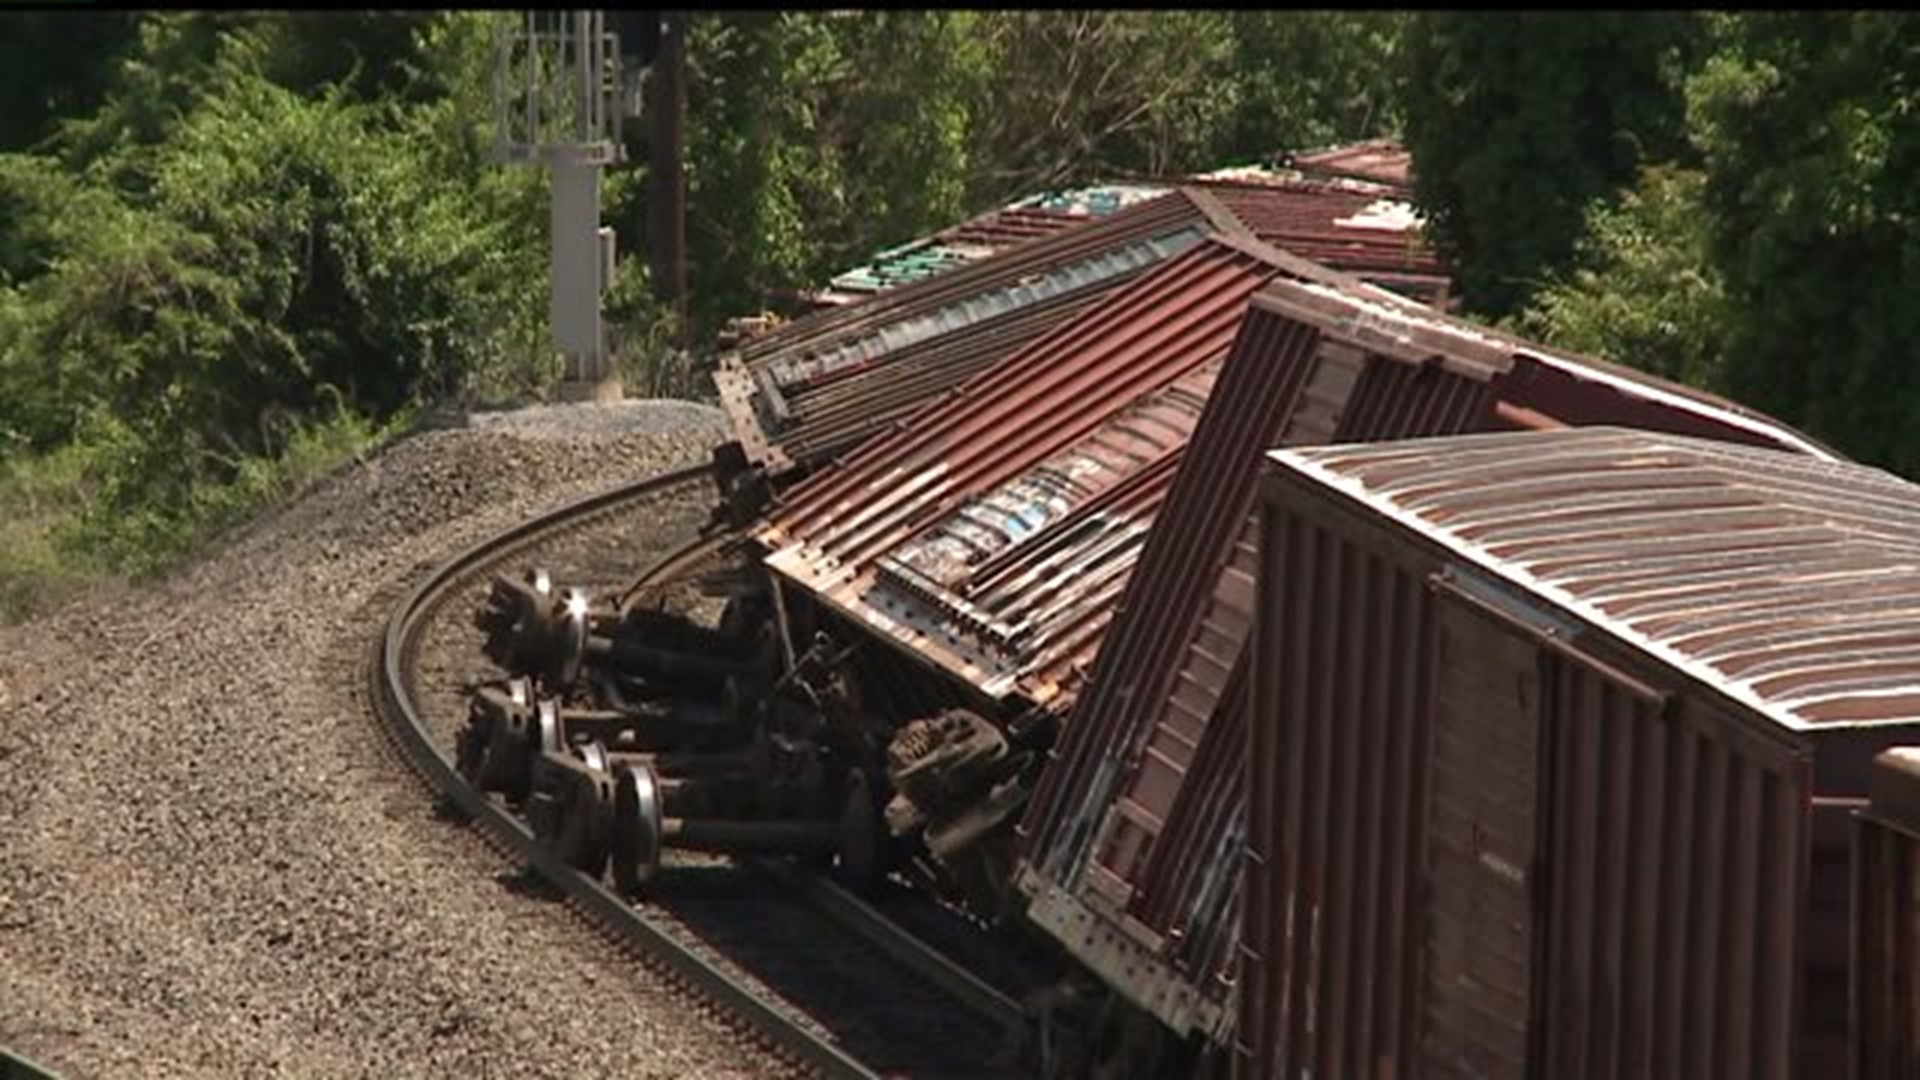 Box cars derail in Harrisburg causing delays for commuters